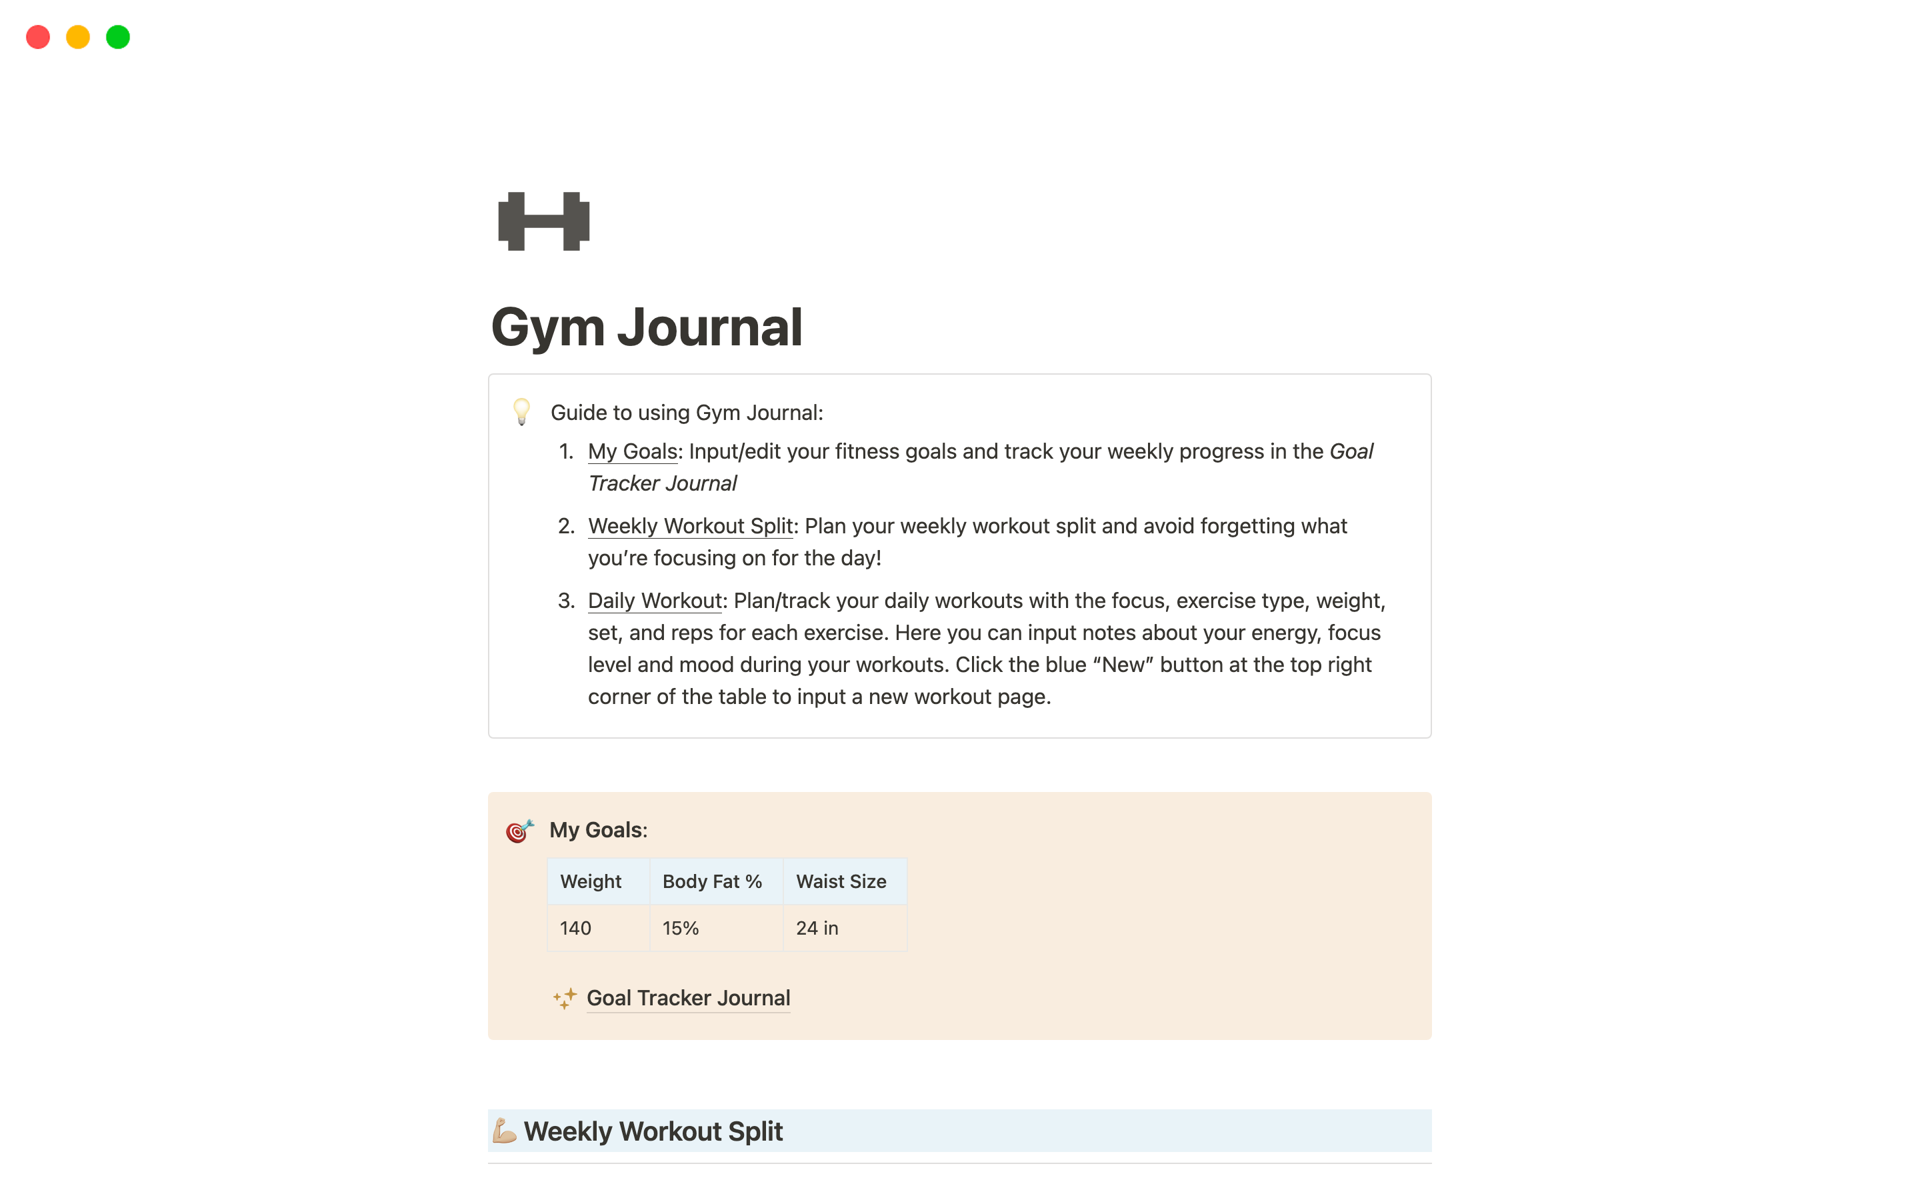 A simple and straightforward daily gym journal to track your fitness goals, daily workout routine, and weekly workout splits.